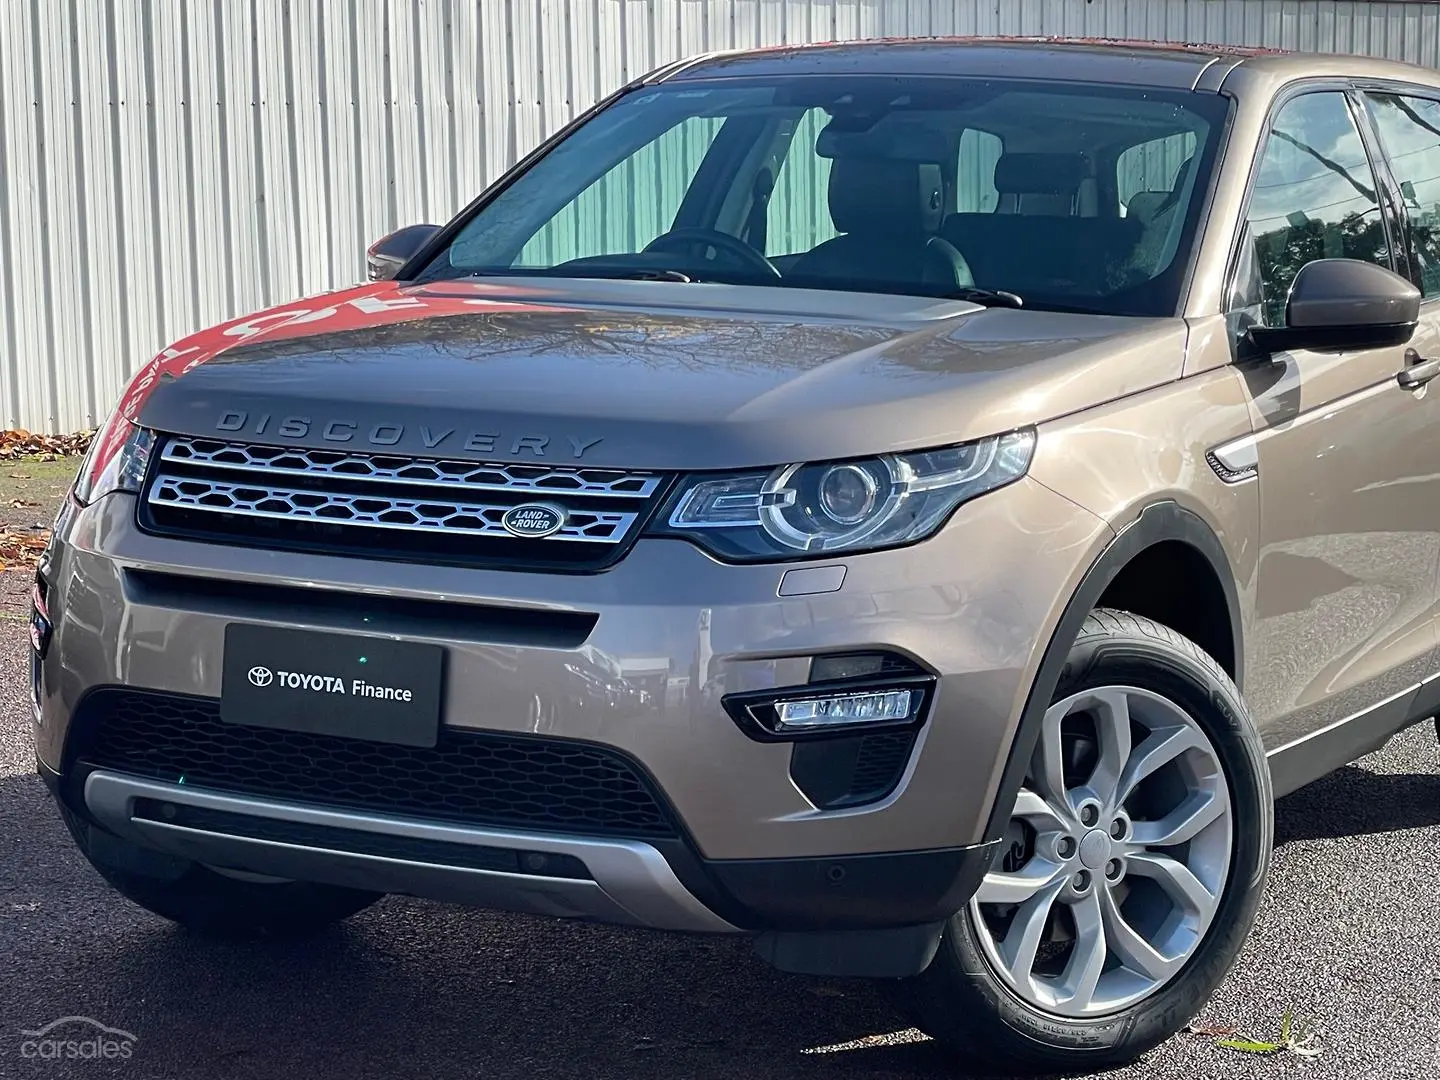 2016 Land Rover Discovery Sport Image 11